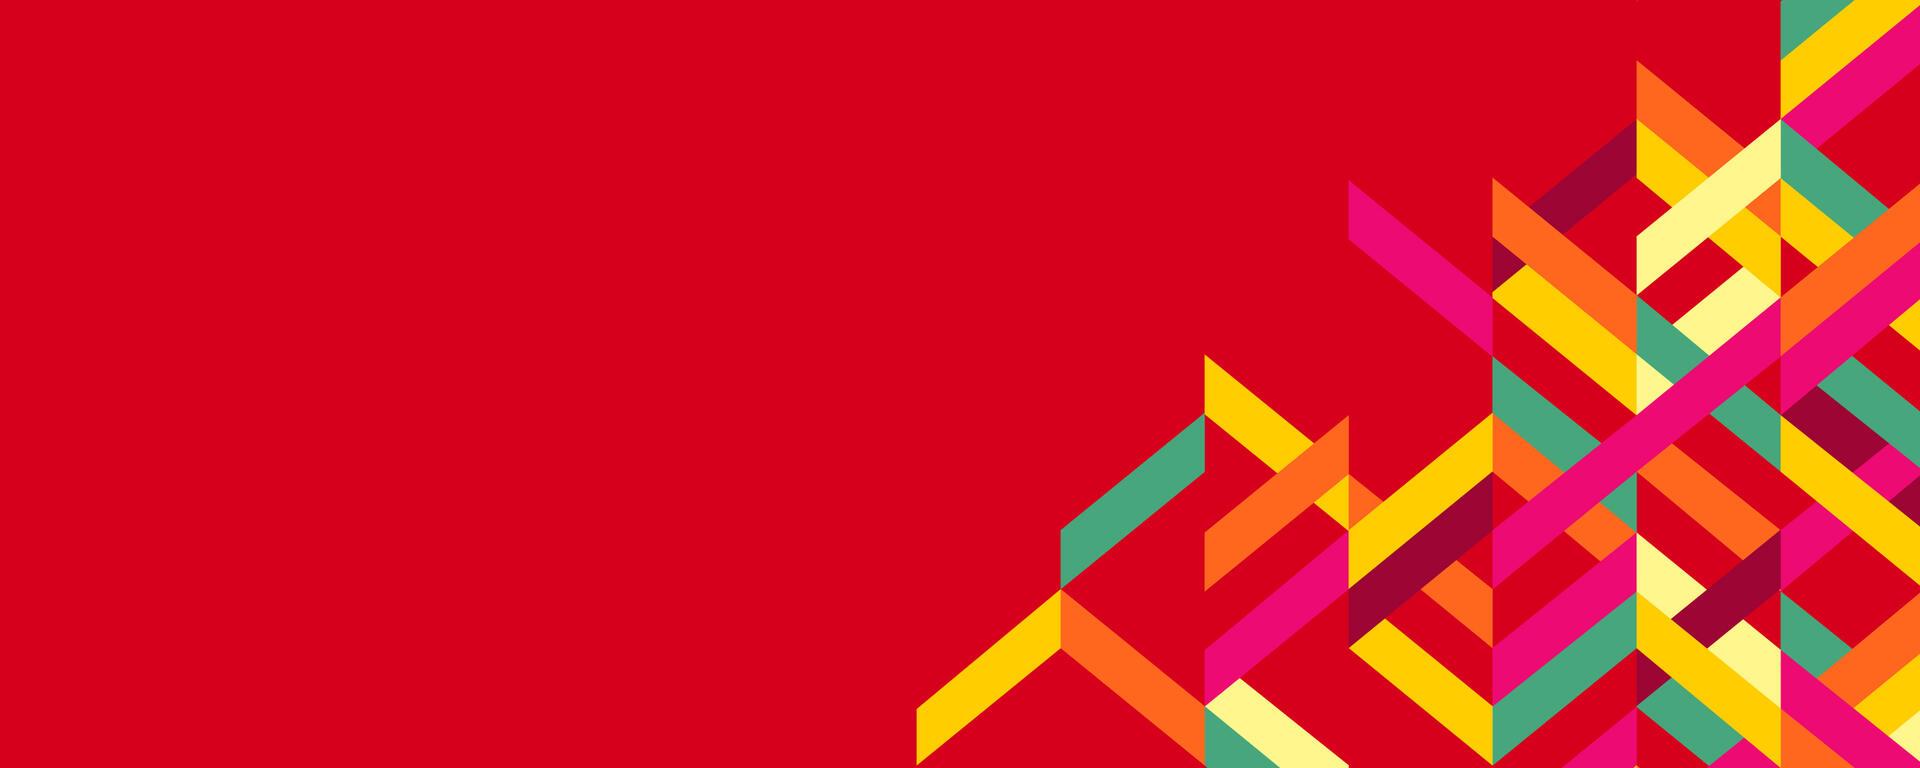 A red banner with green, yellow, pink, and orange intersecting lines along the right side.